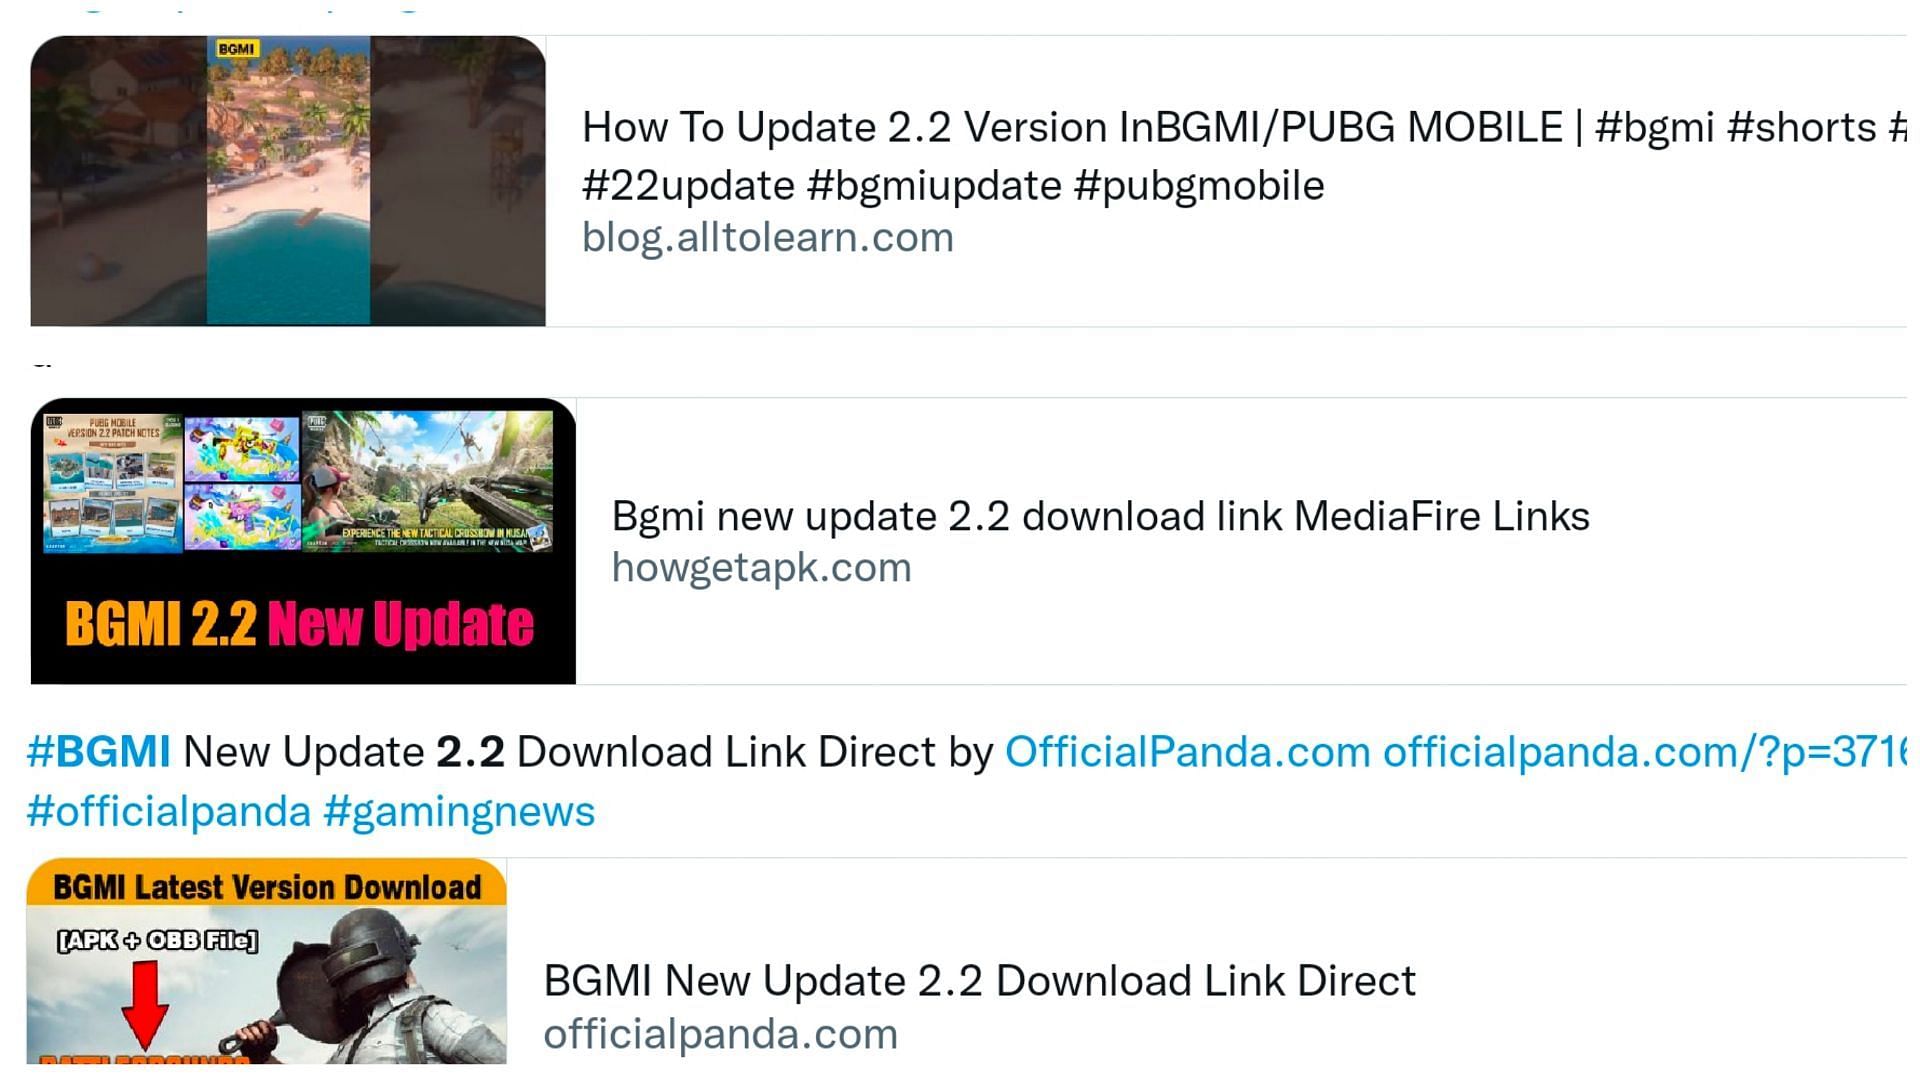 One should avoid any fake download links for Battlegrounds Mobile India 2.2 version update (Image via Twitter)